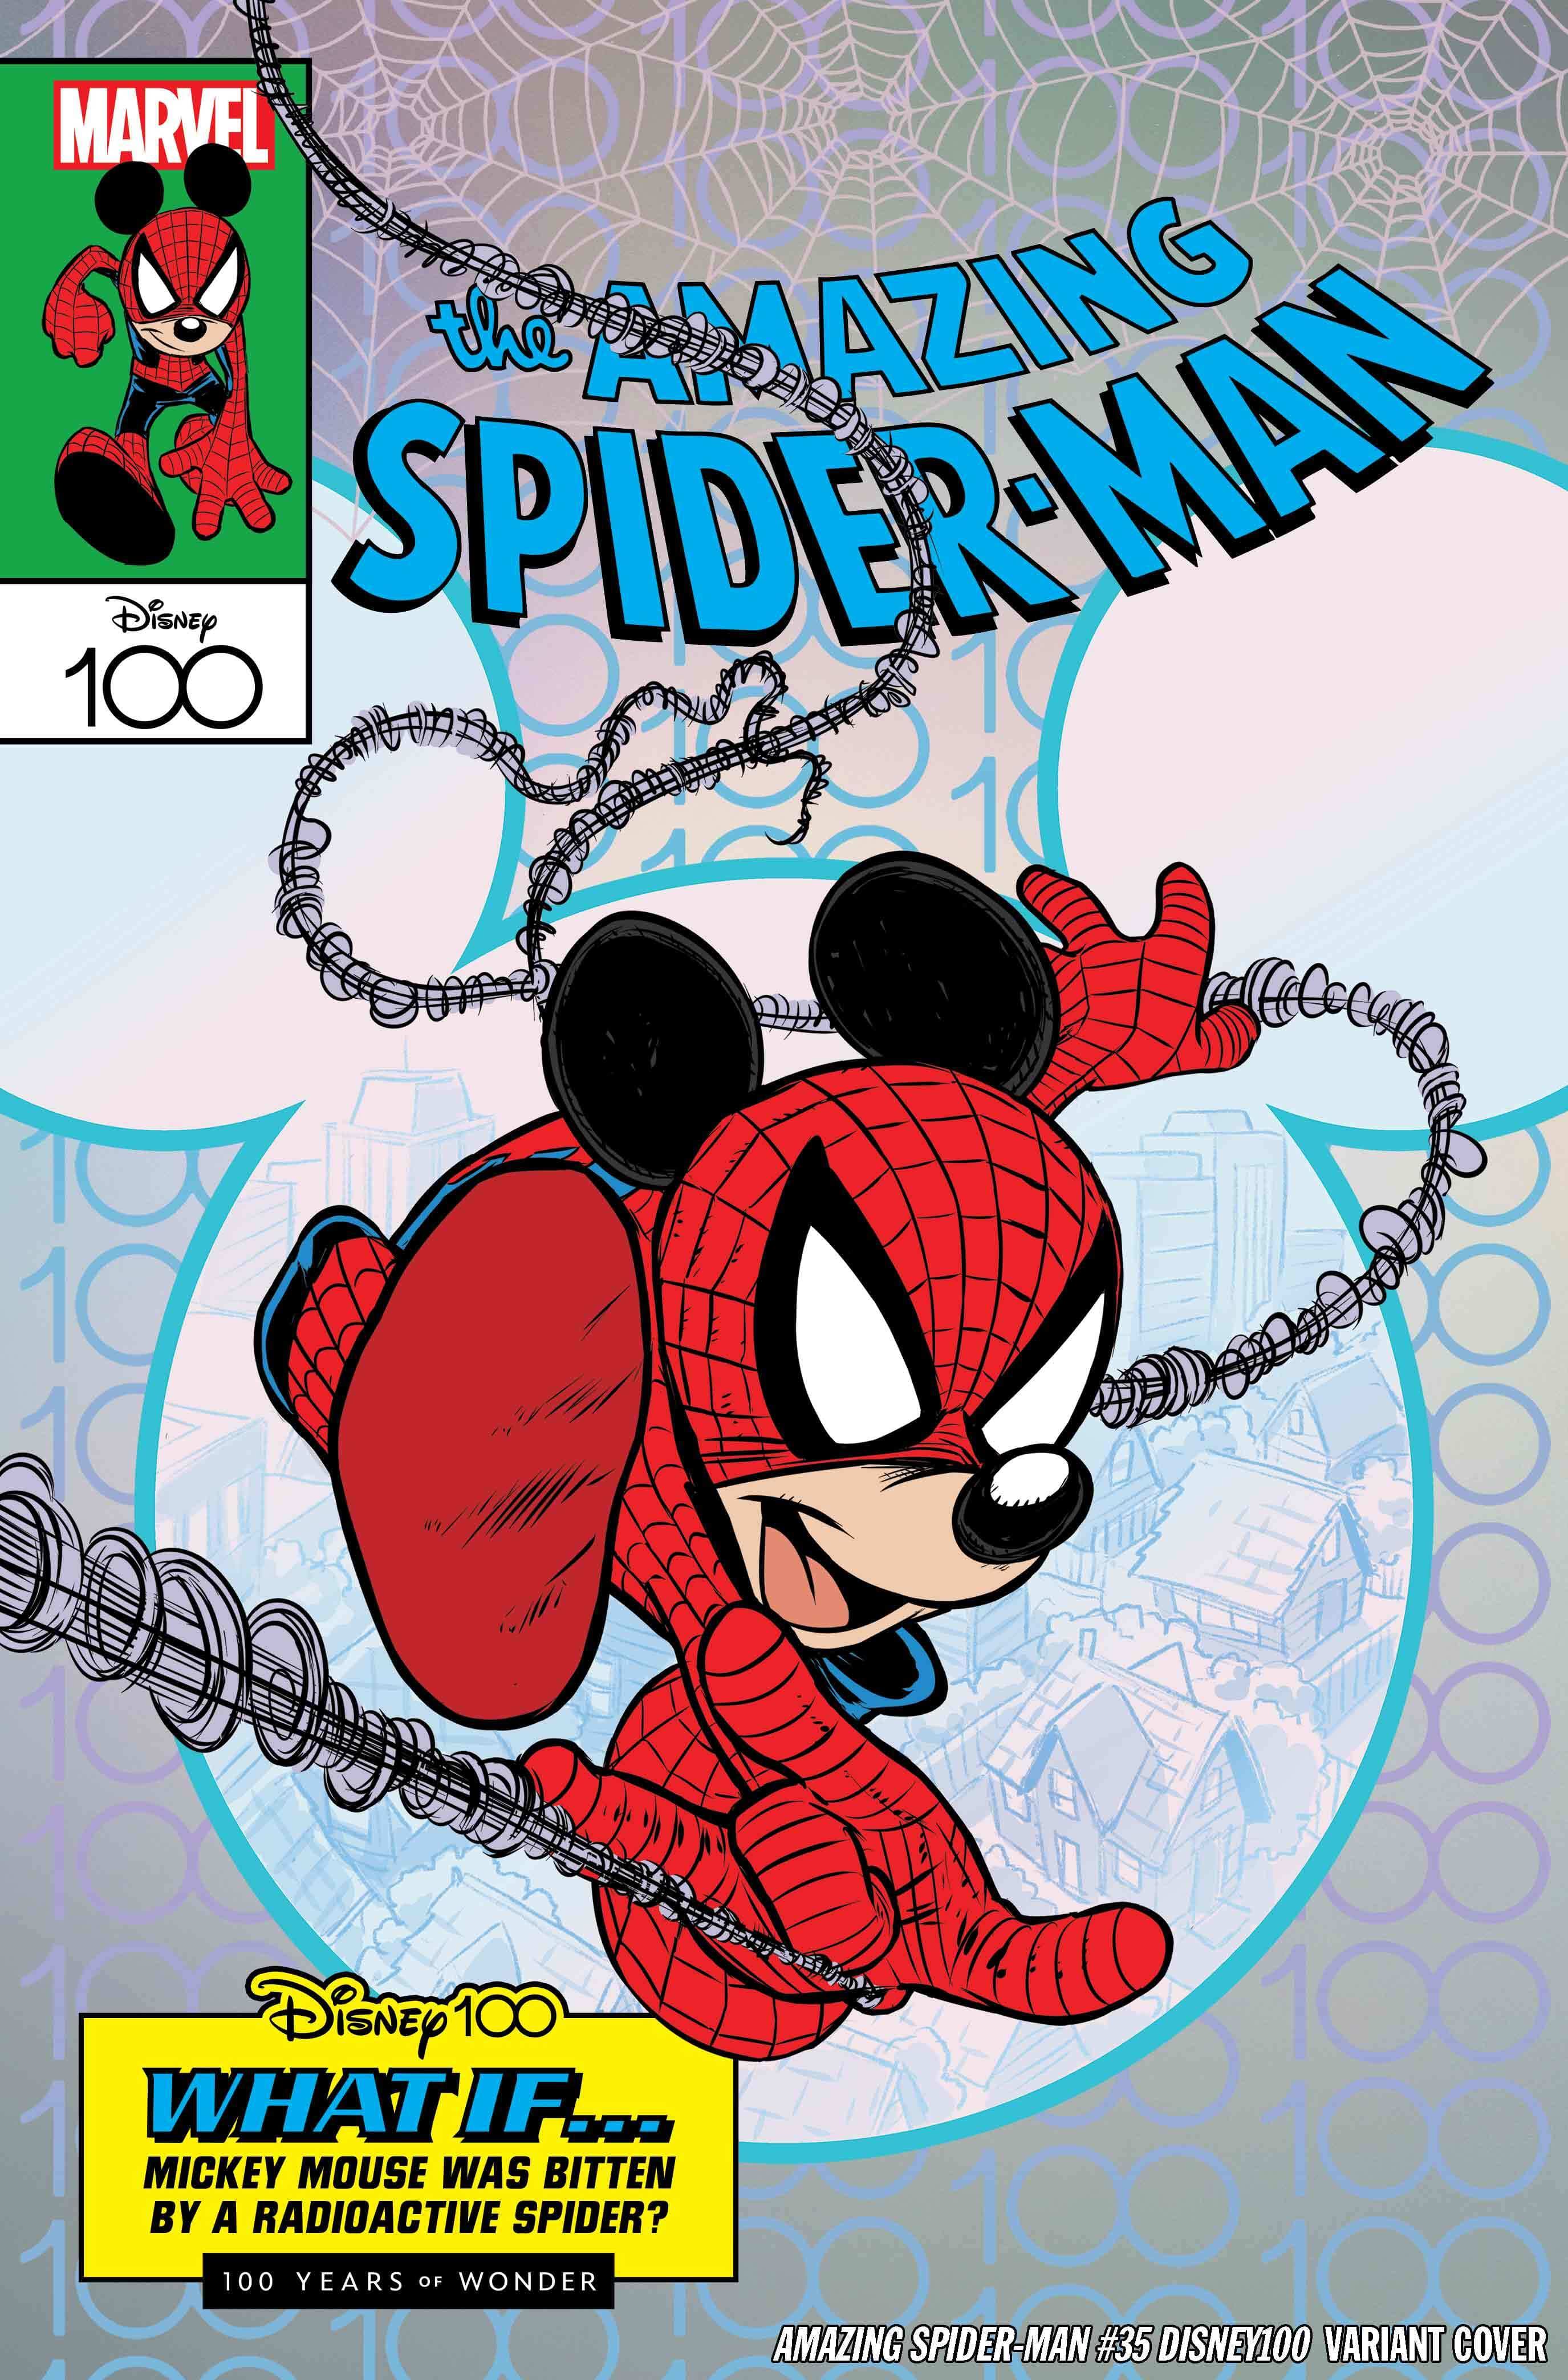 New Disney100 Variant Covers Pay Tribute to Blockbuster Marvel